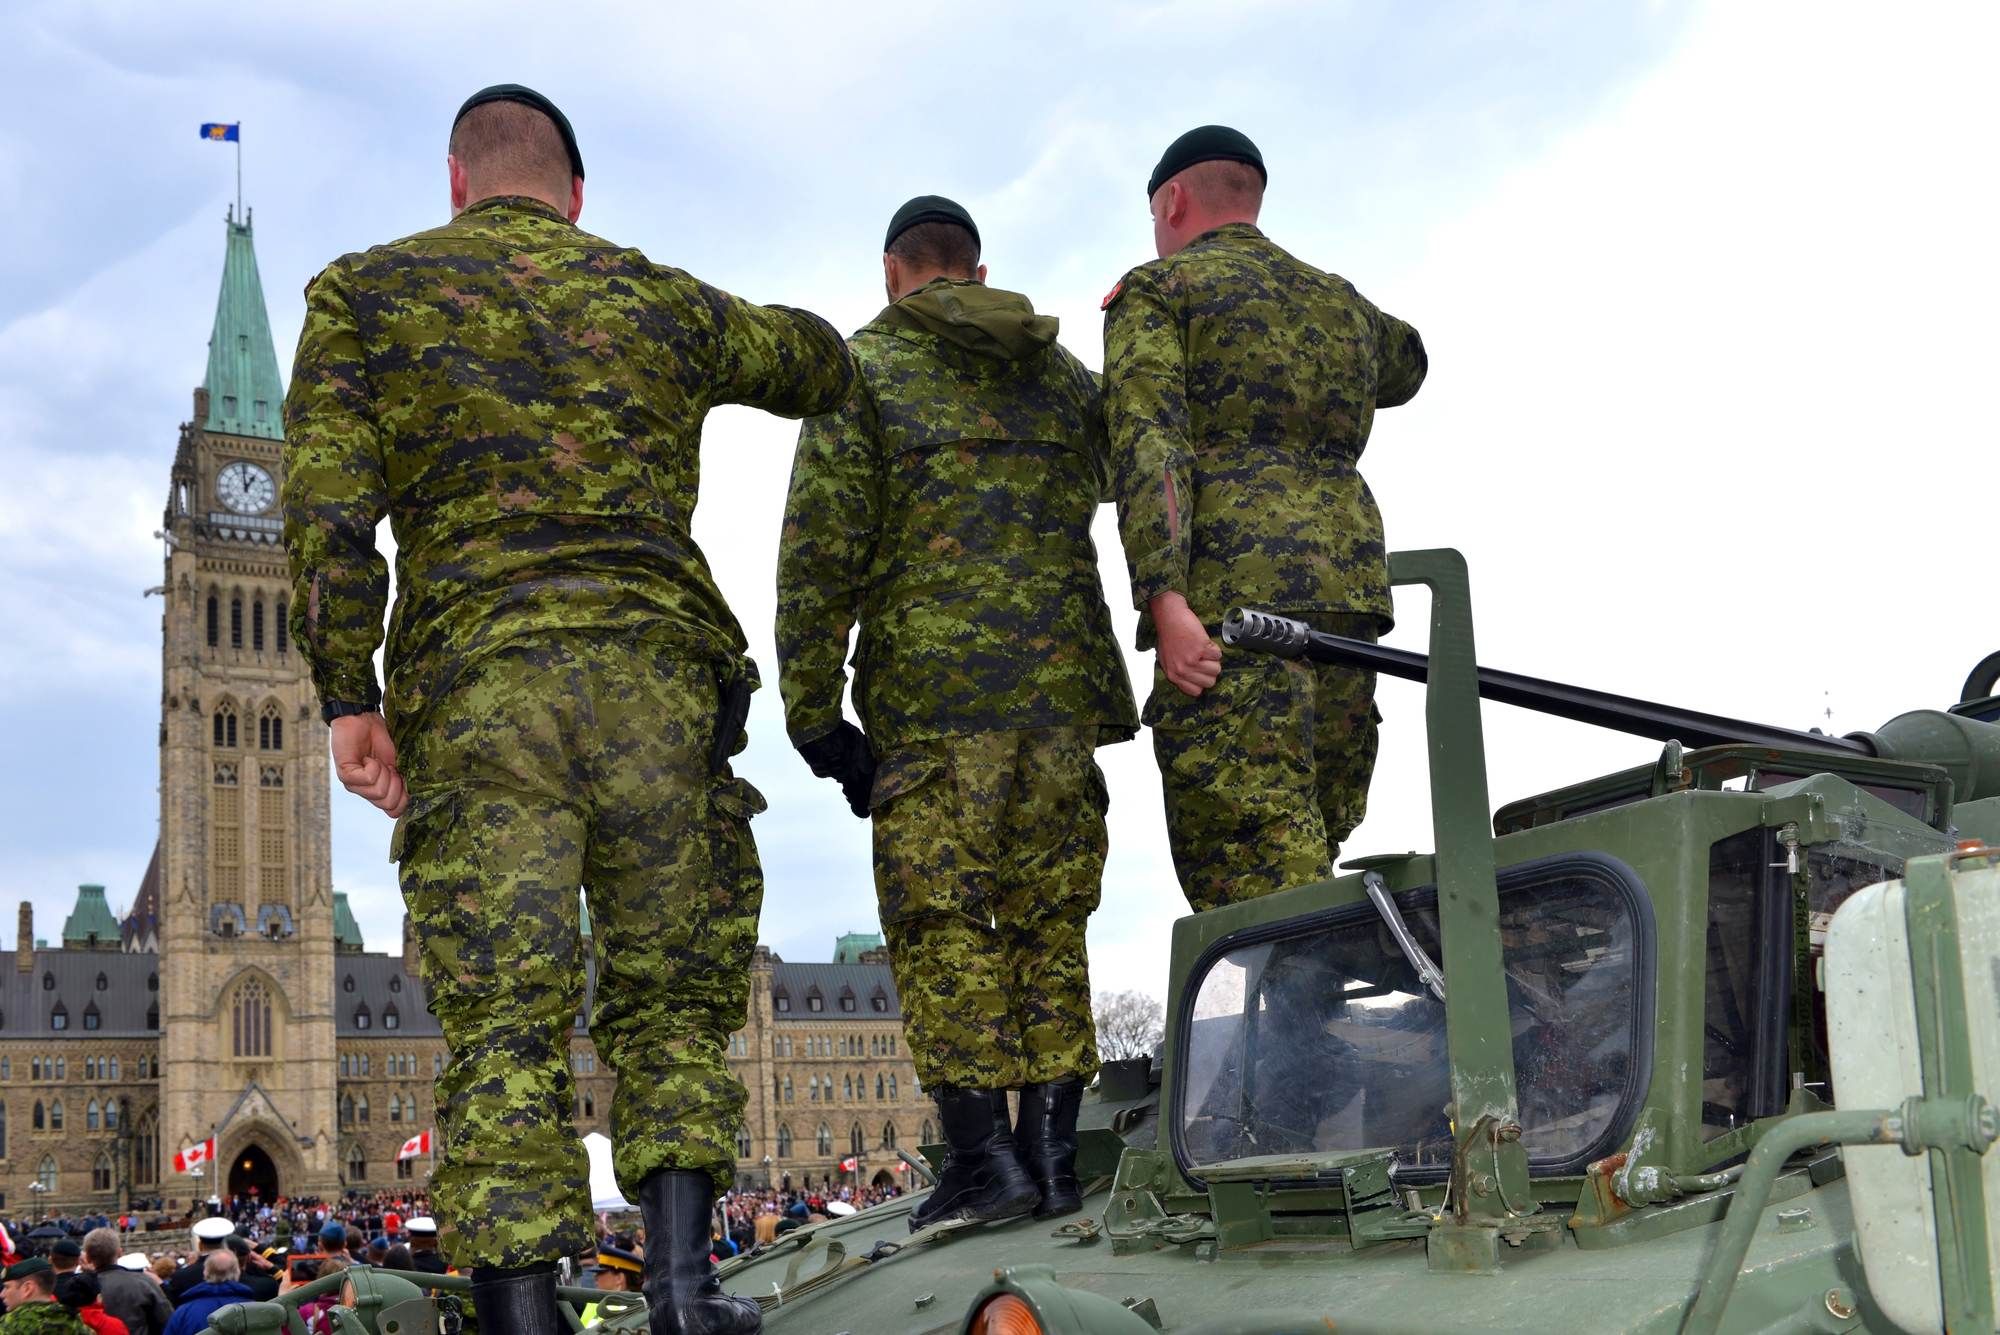 Canadian armed forces soldiers saluting regarding the sexual misconduct class action lawsuit settlement 